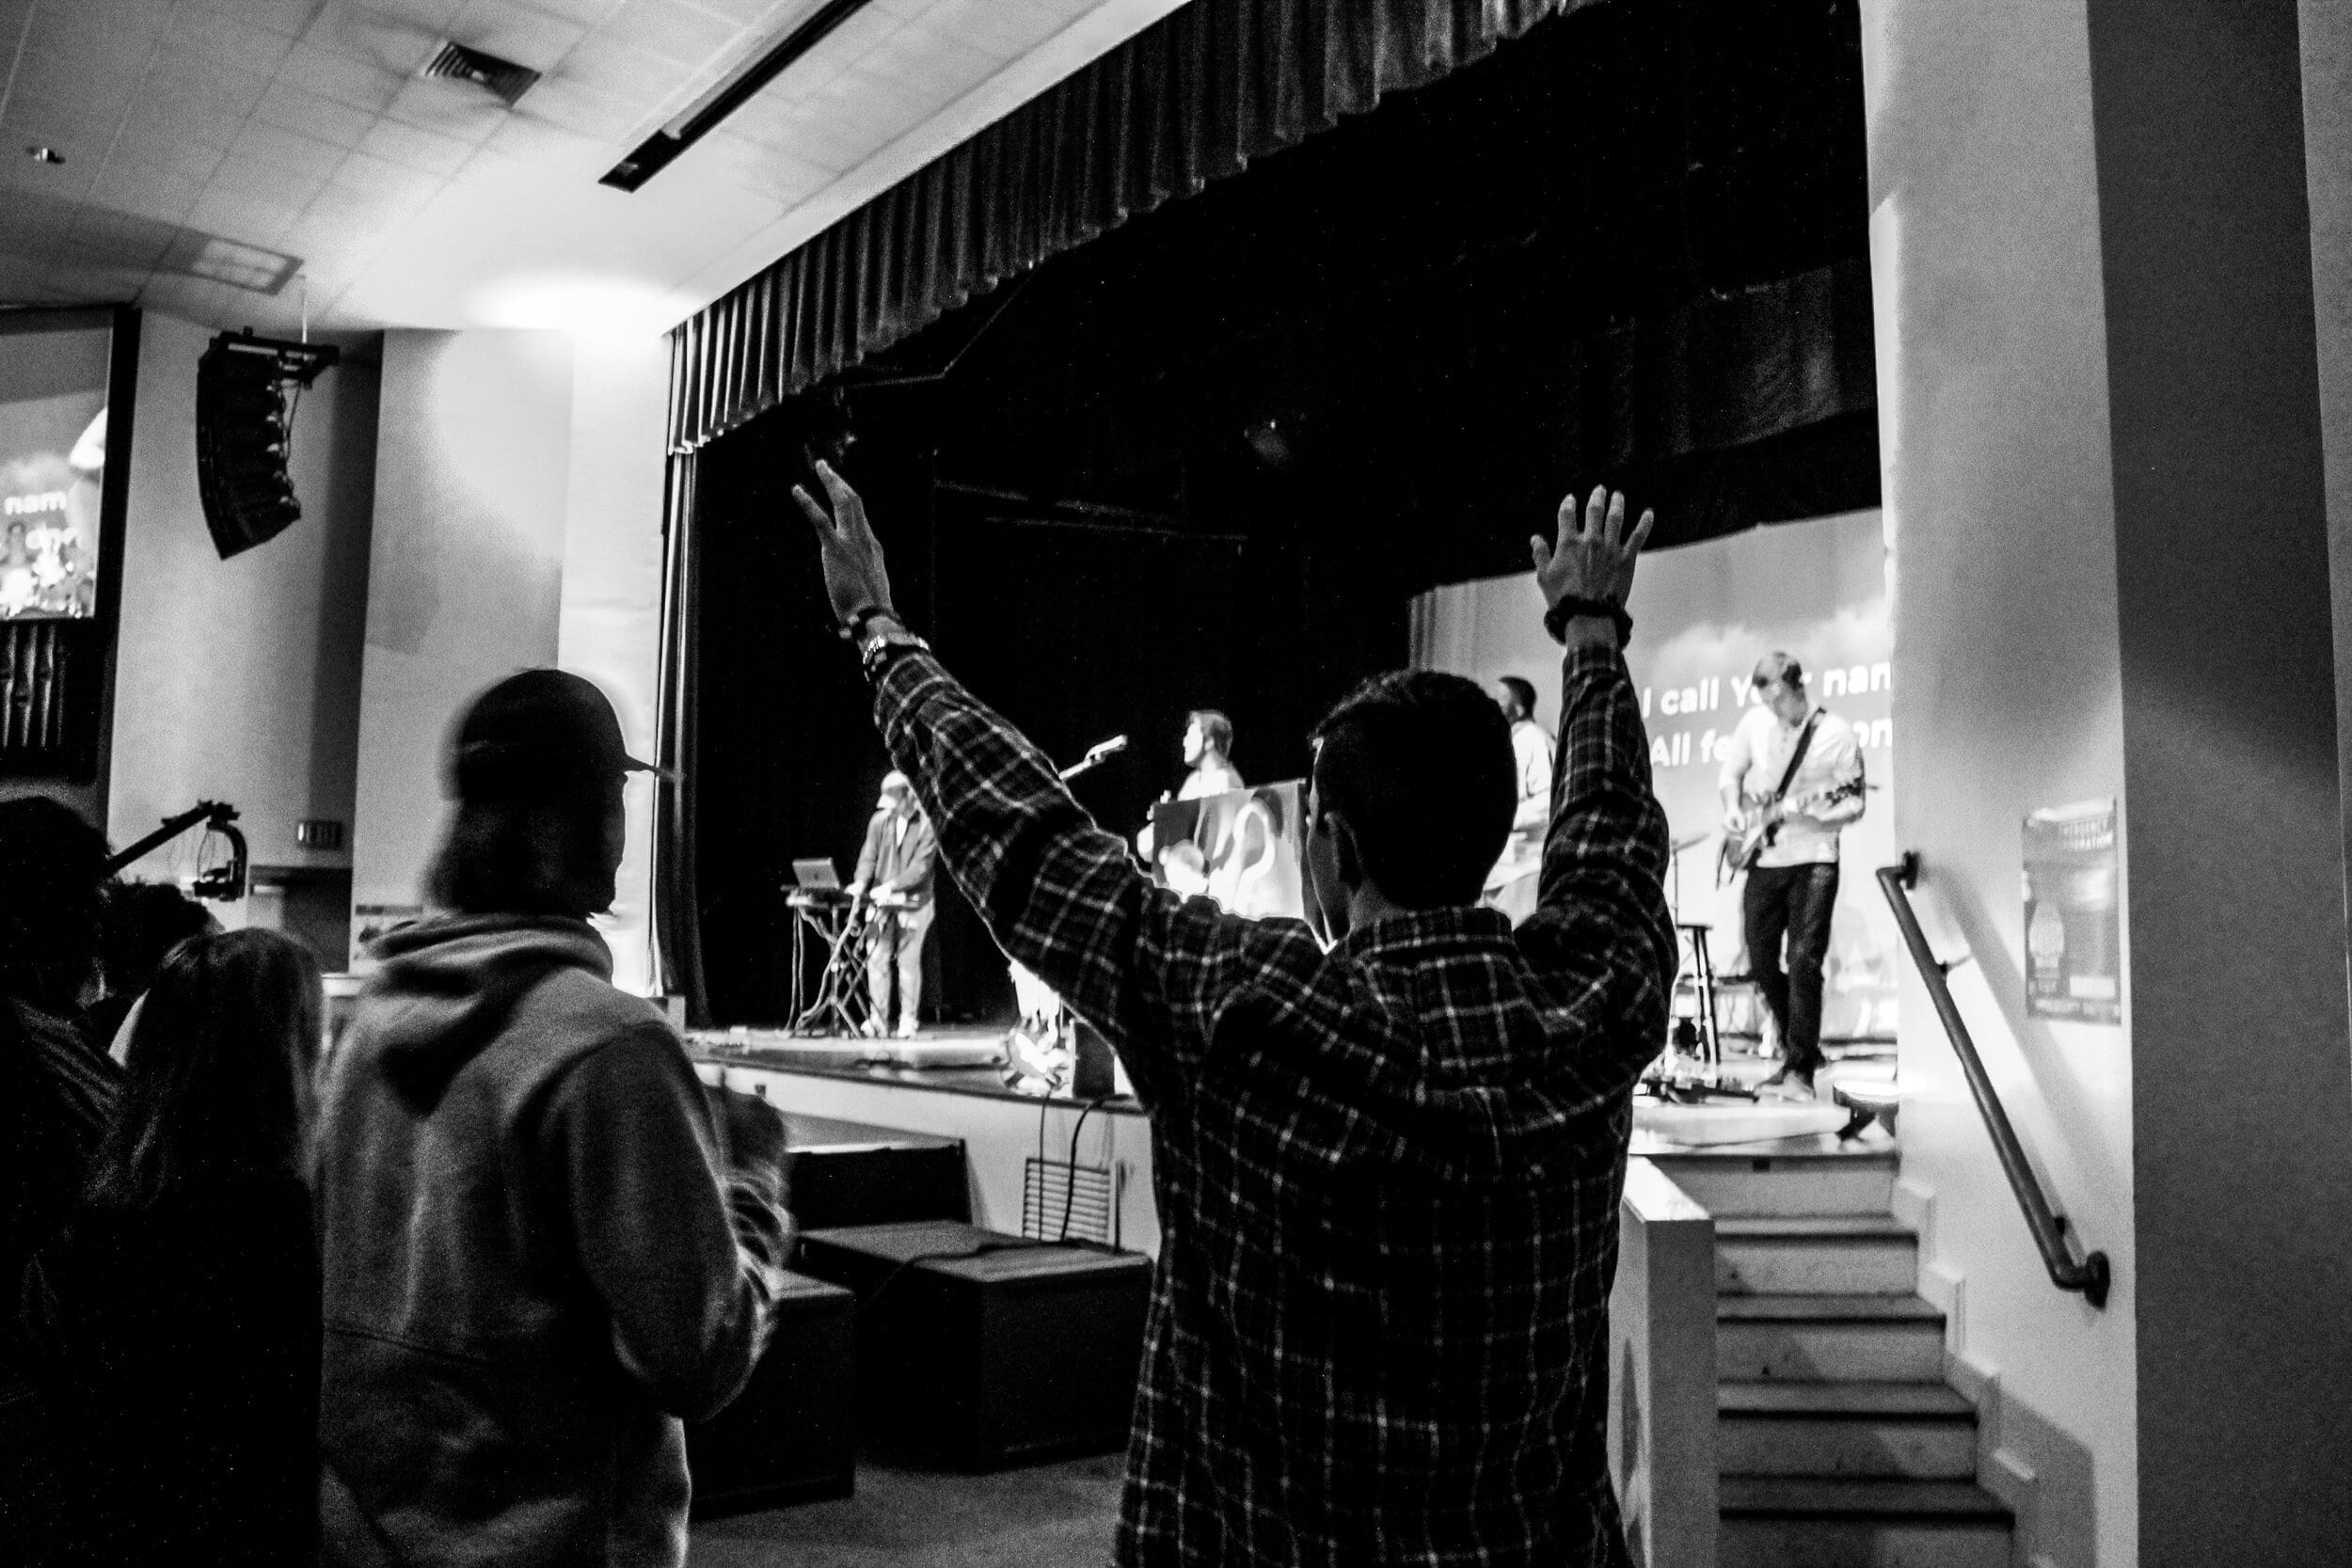 Joey Noyes worshipping with hands lifted.